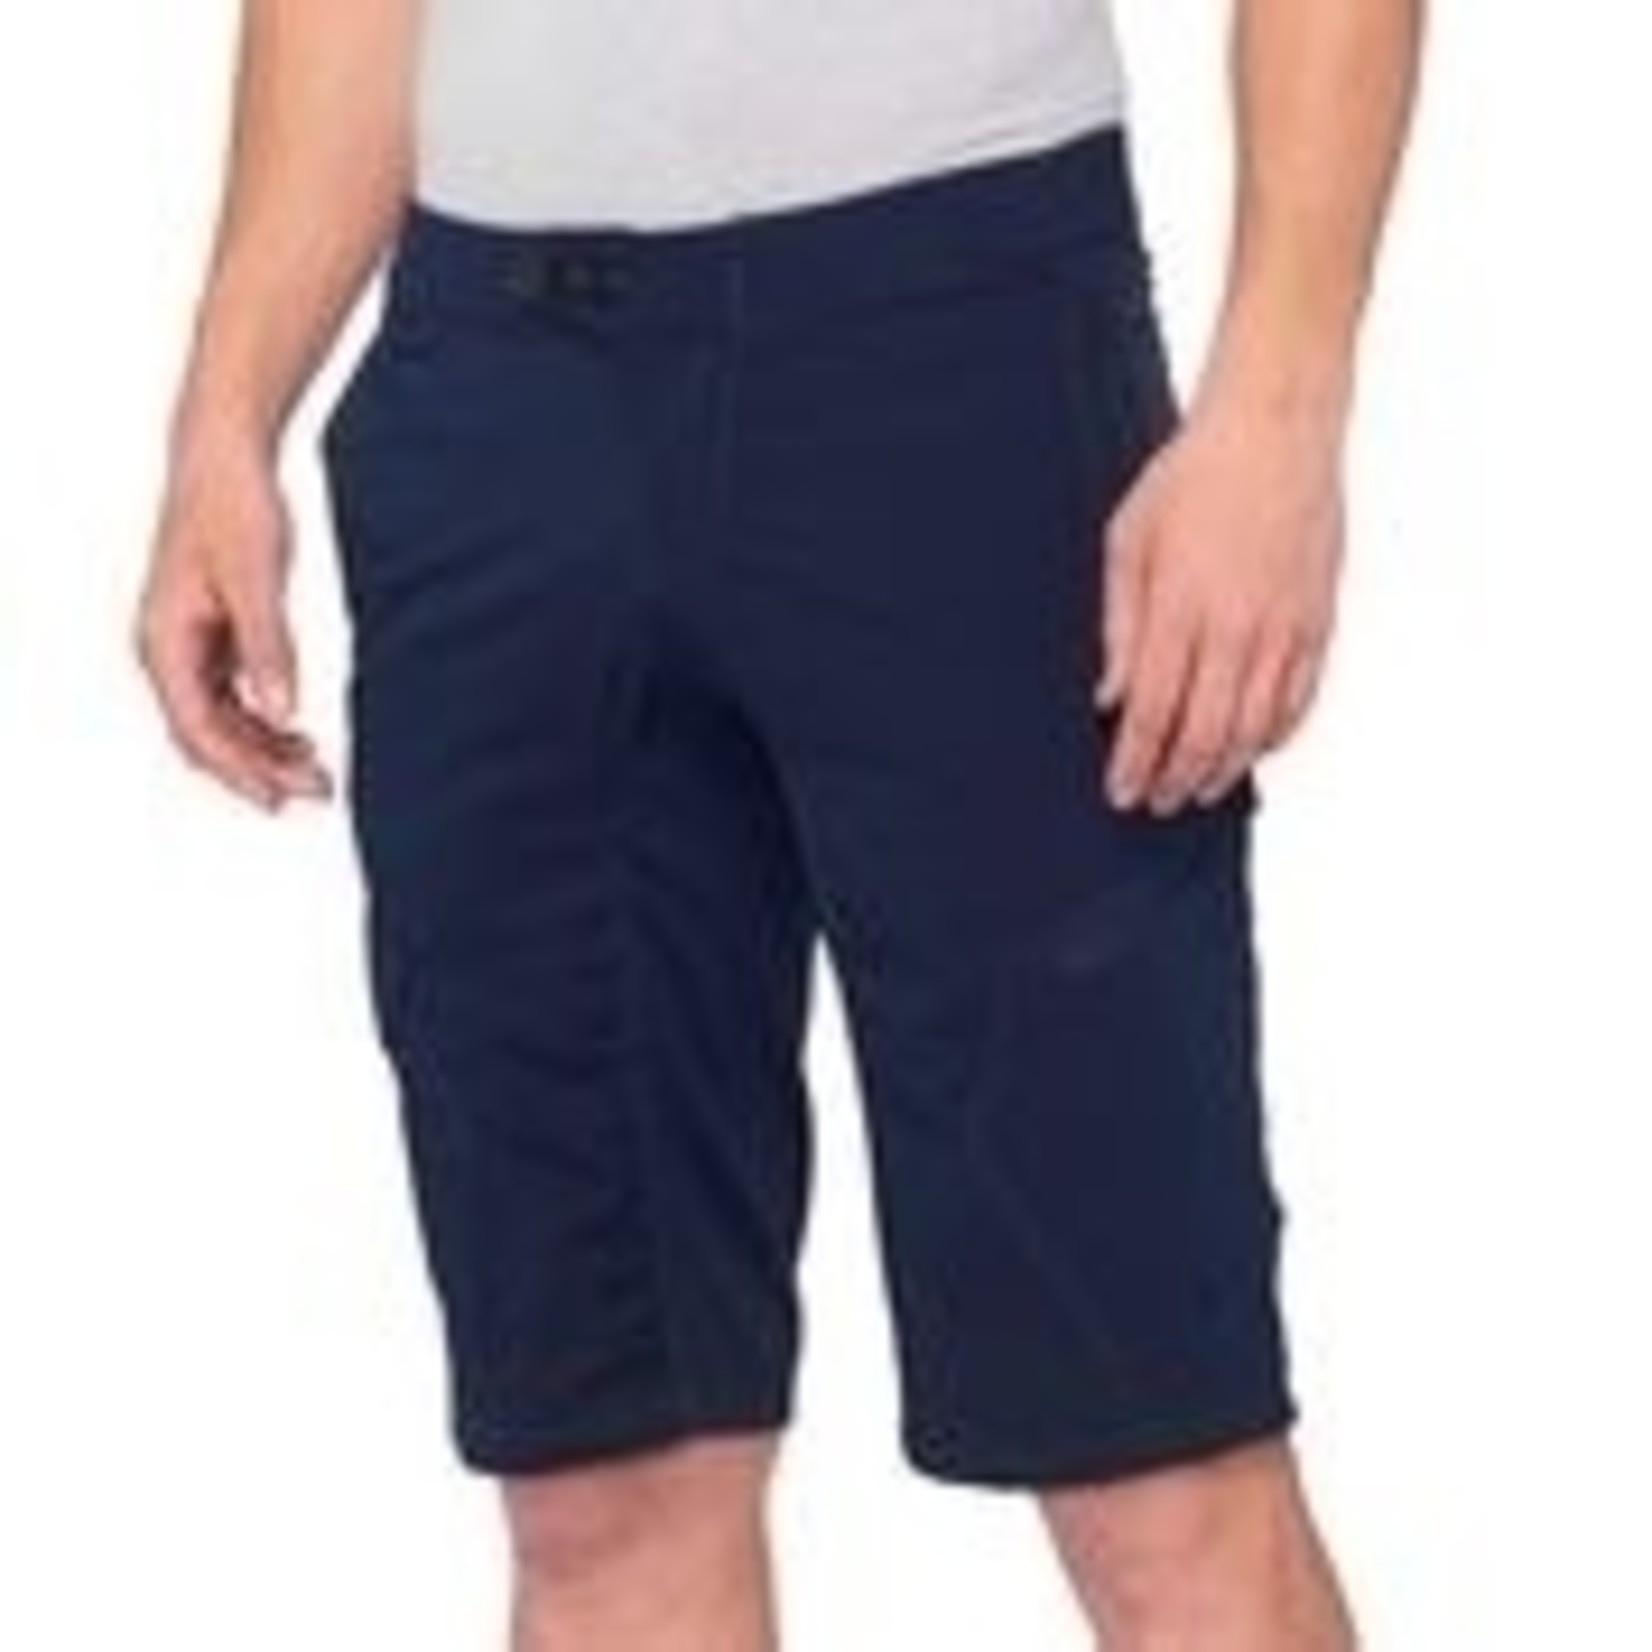 100% Ridecamp Bike Gear Men's 100% Polyester Shorts - Navy -Breathable, Comfort